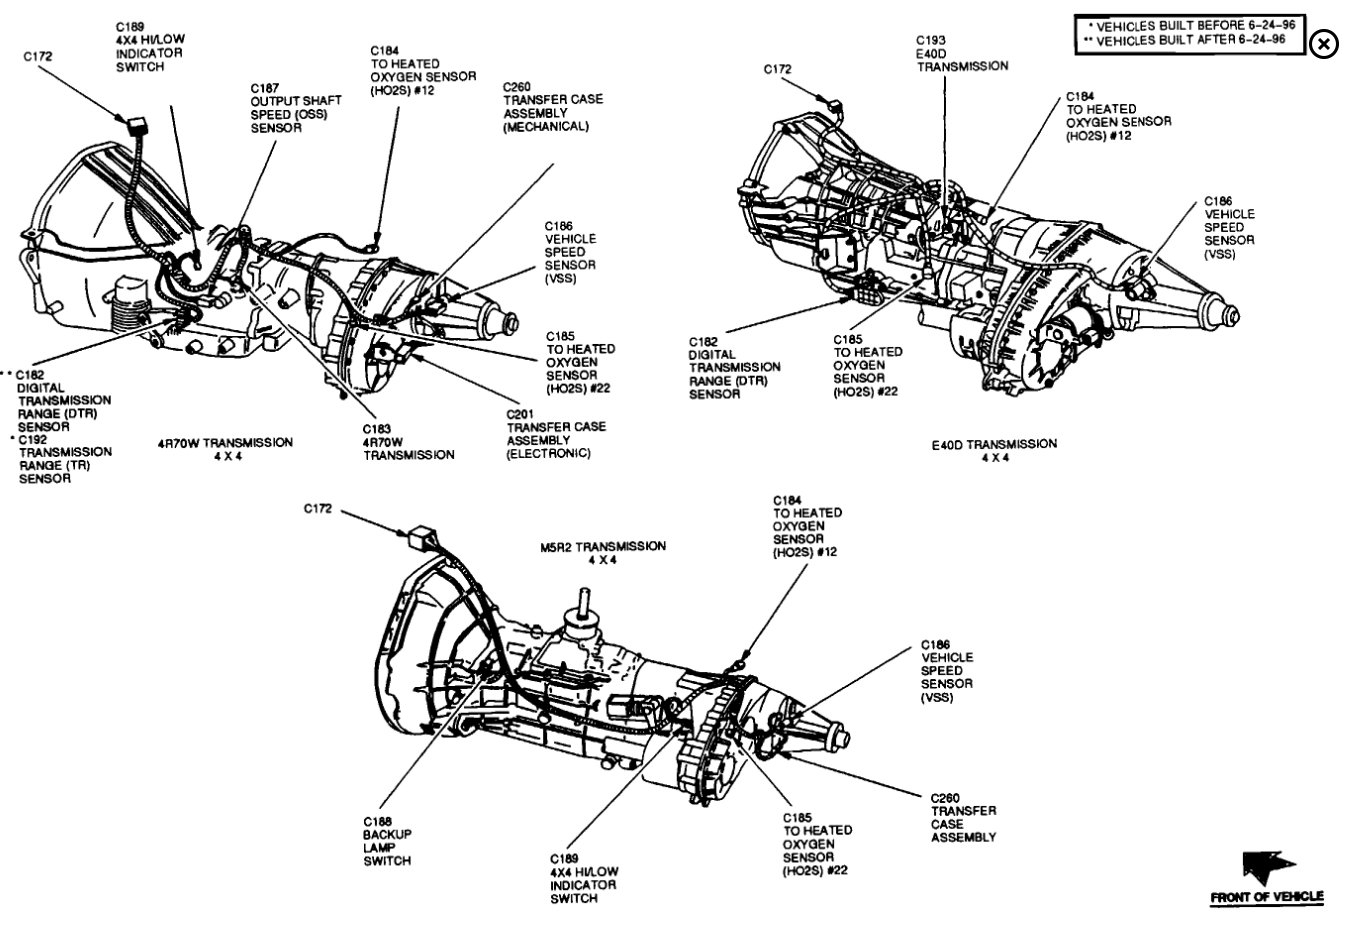 4x4 truck transmission diagram where you can find the f150 speed sensor